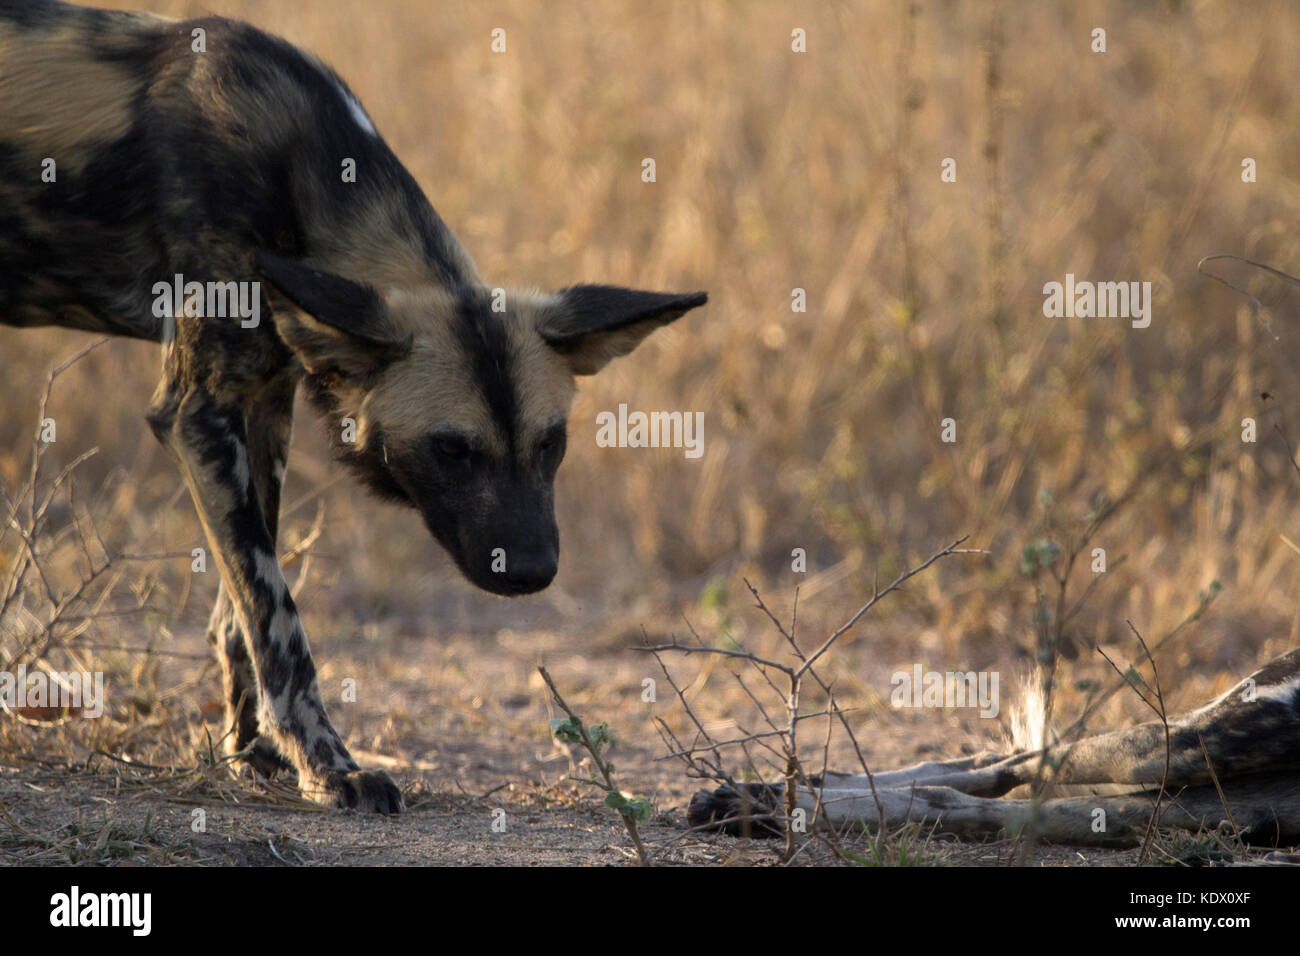 African wild dogs, Kruger National Park, South Africa Stock Photo